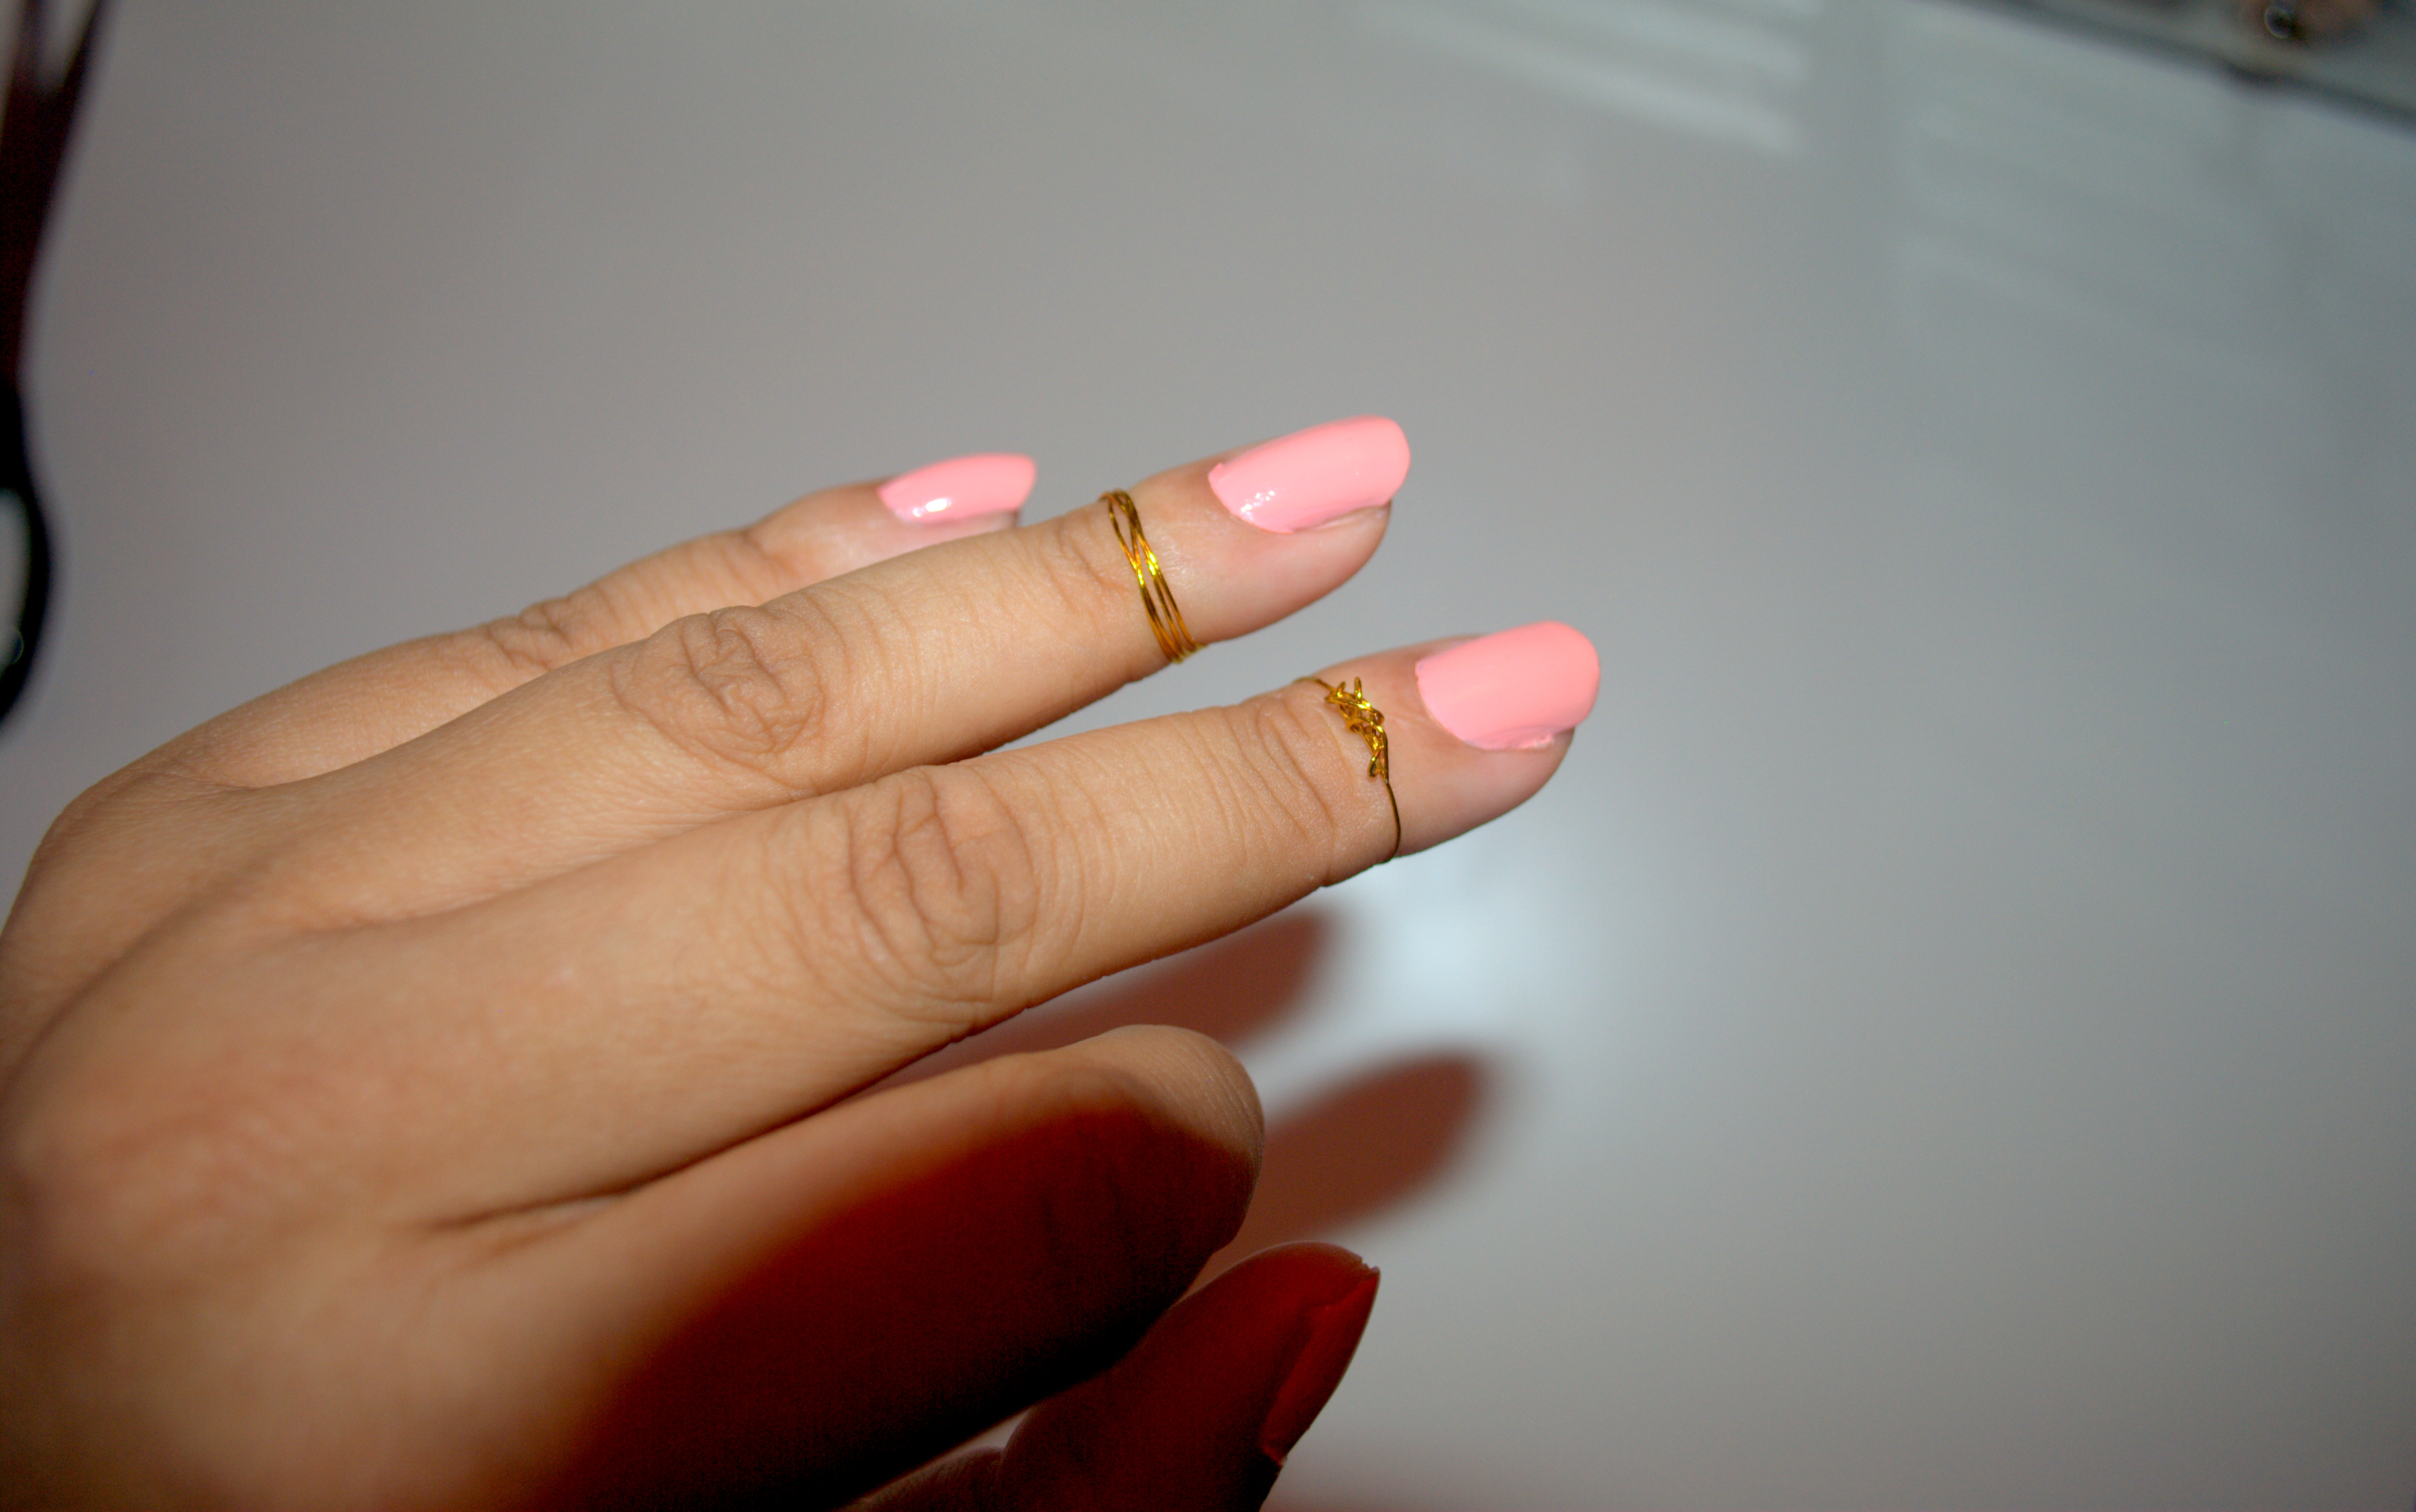 Extra small top knuckle rings